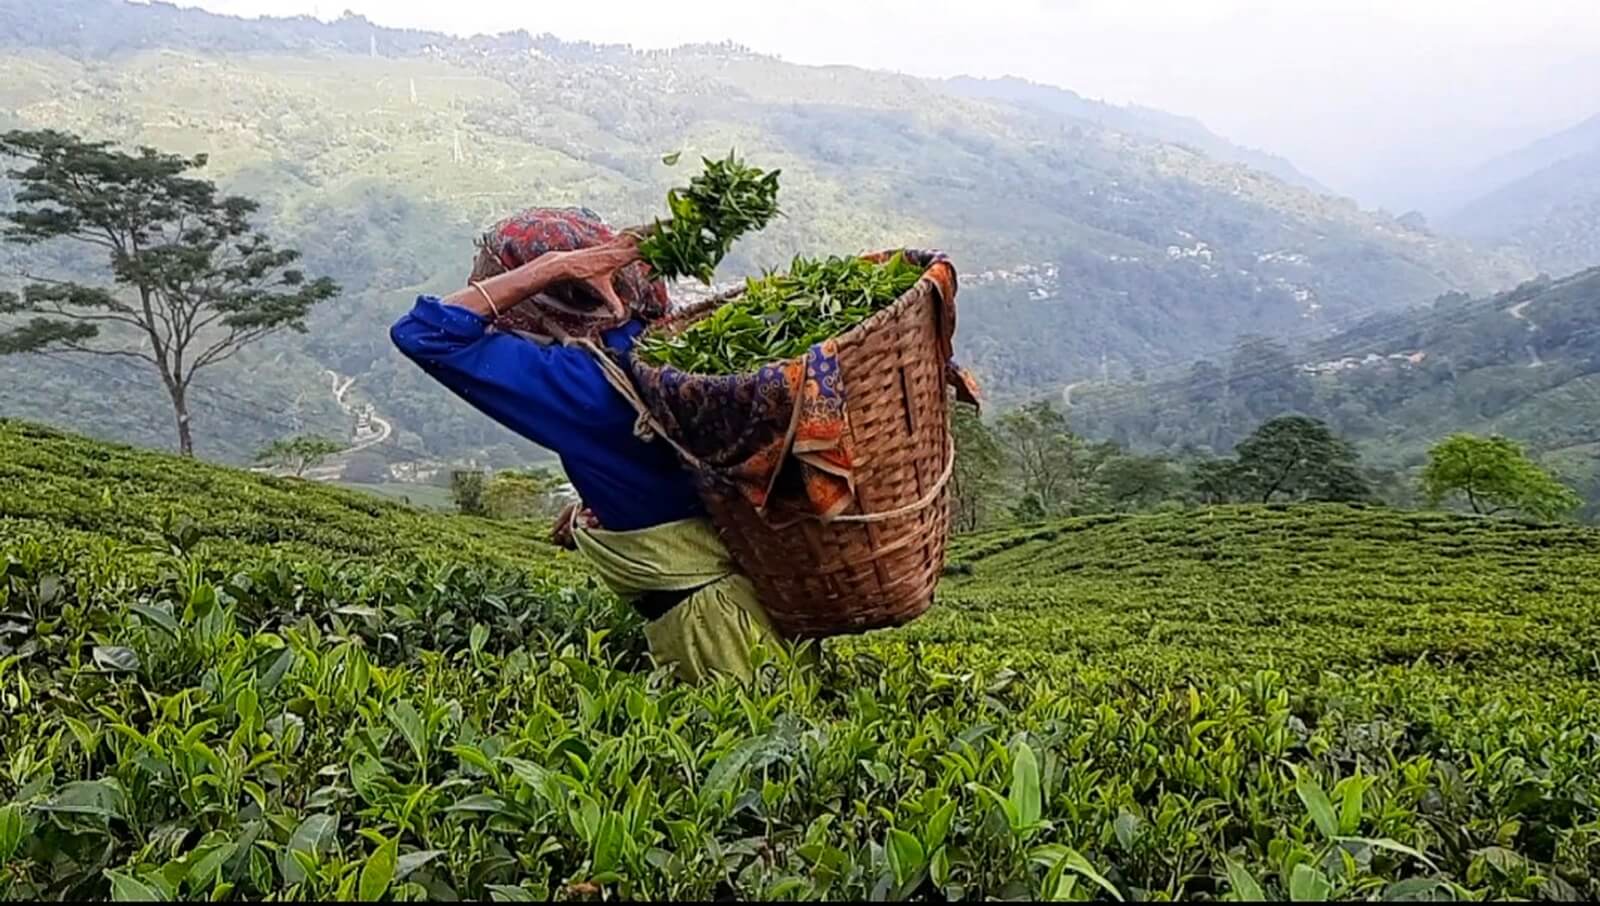 A lady tea plucker is adding fresh green tea leaves in her basket